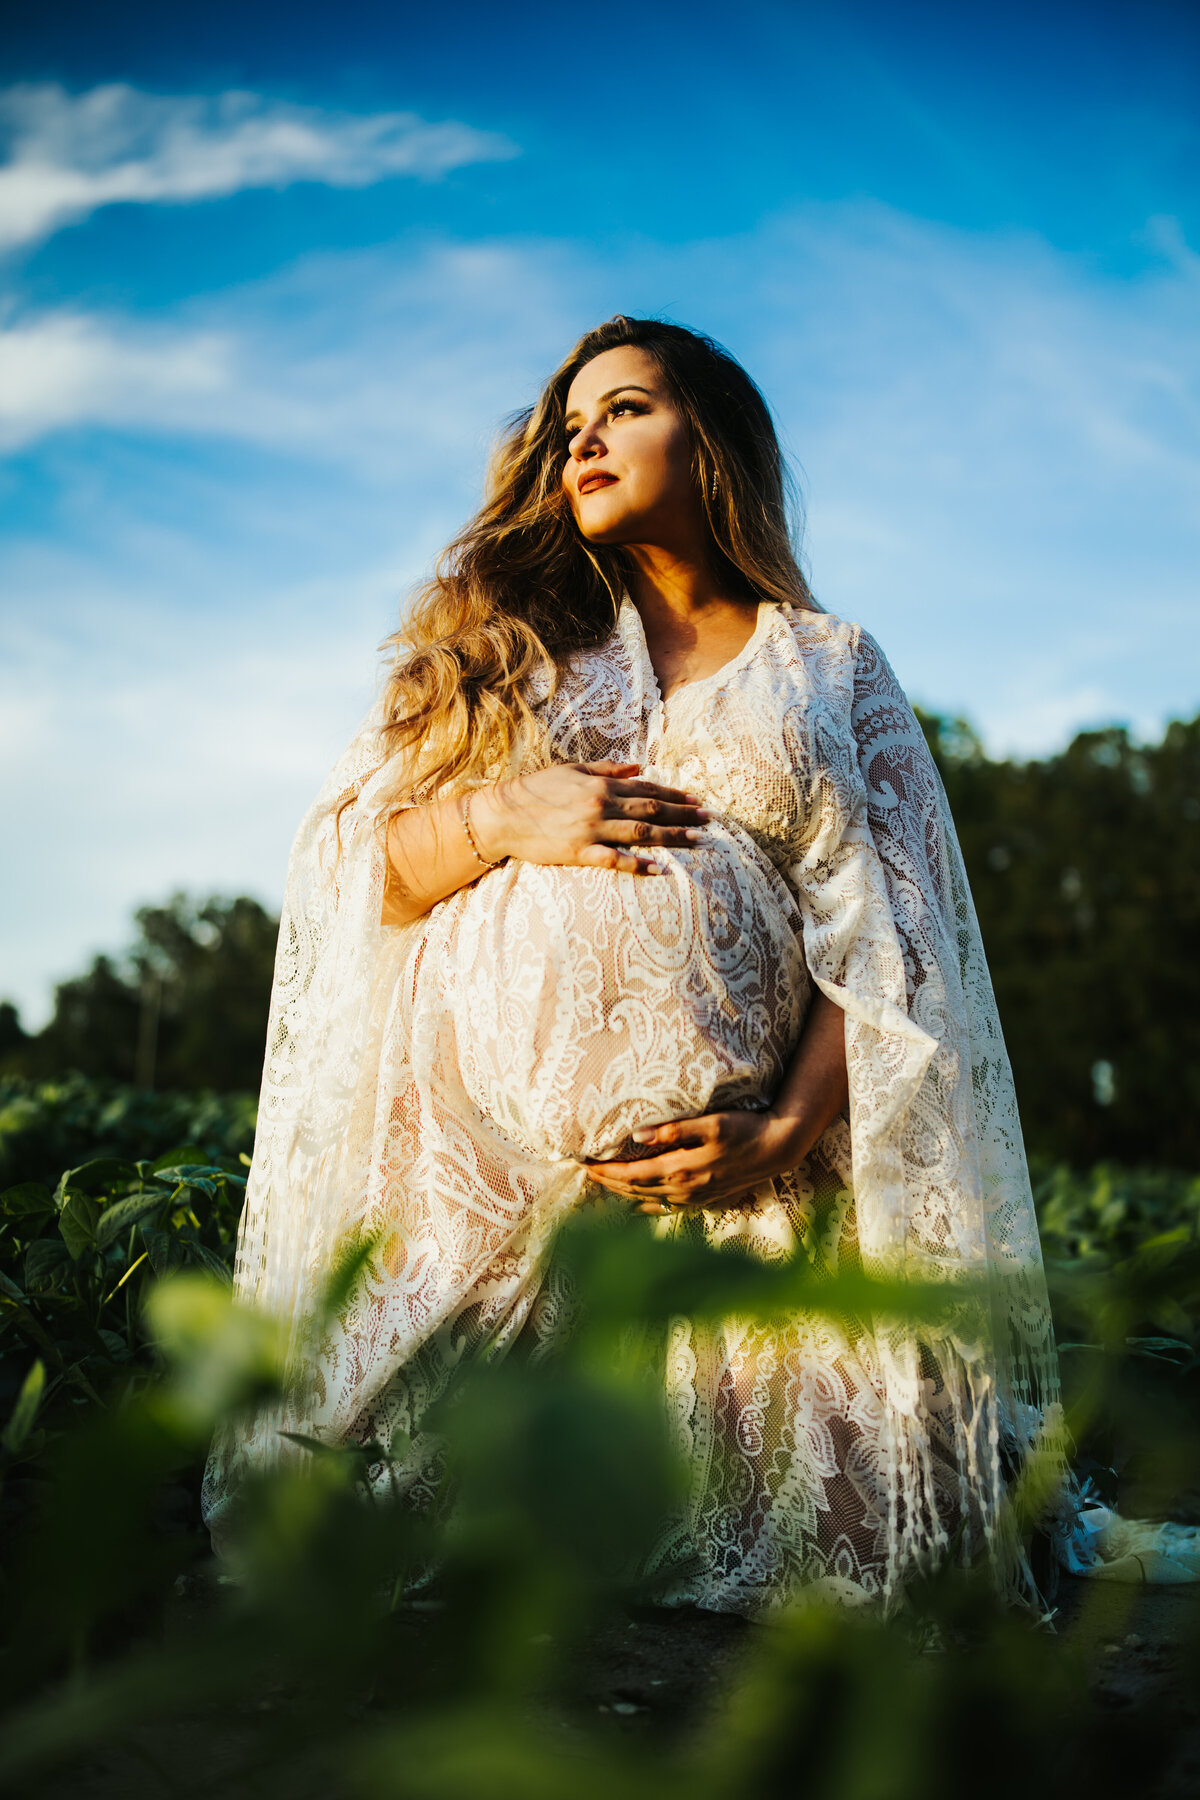 colorful harsh lit Maternity photo of a women in a lace dress sitting in a farm field